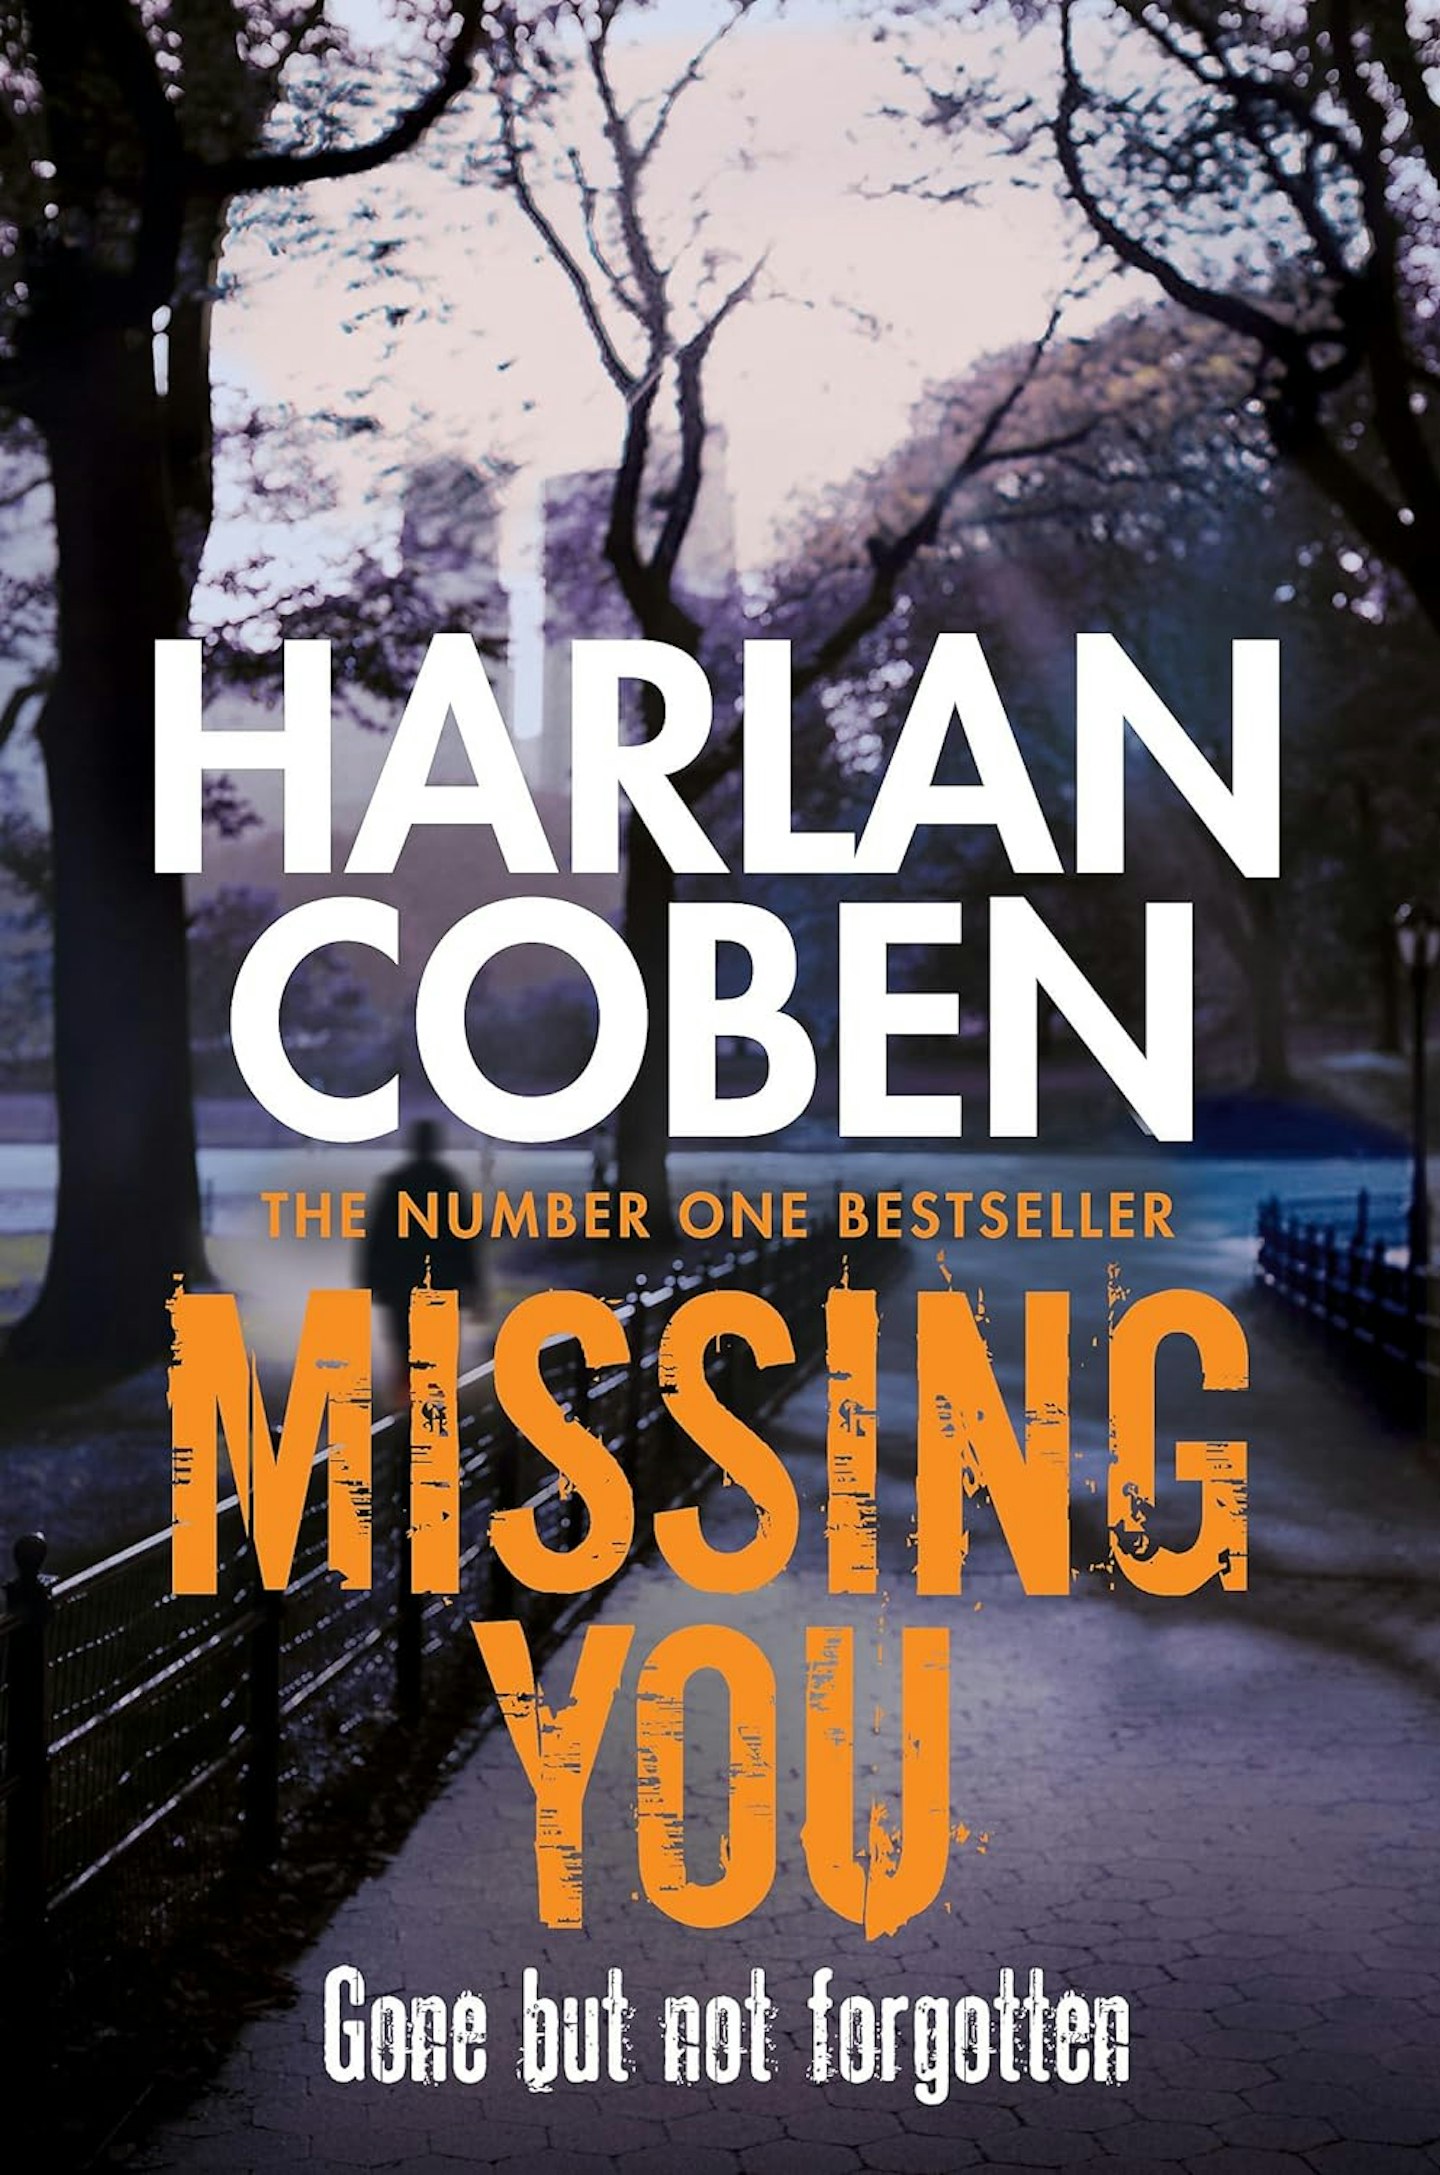 Missing You by Harlan Coben